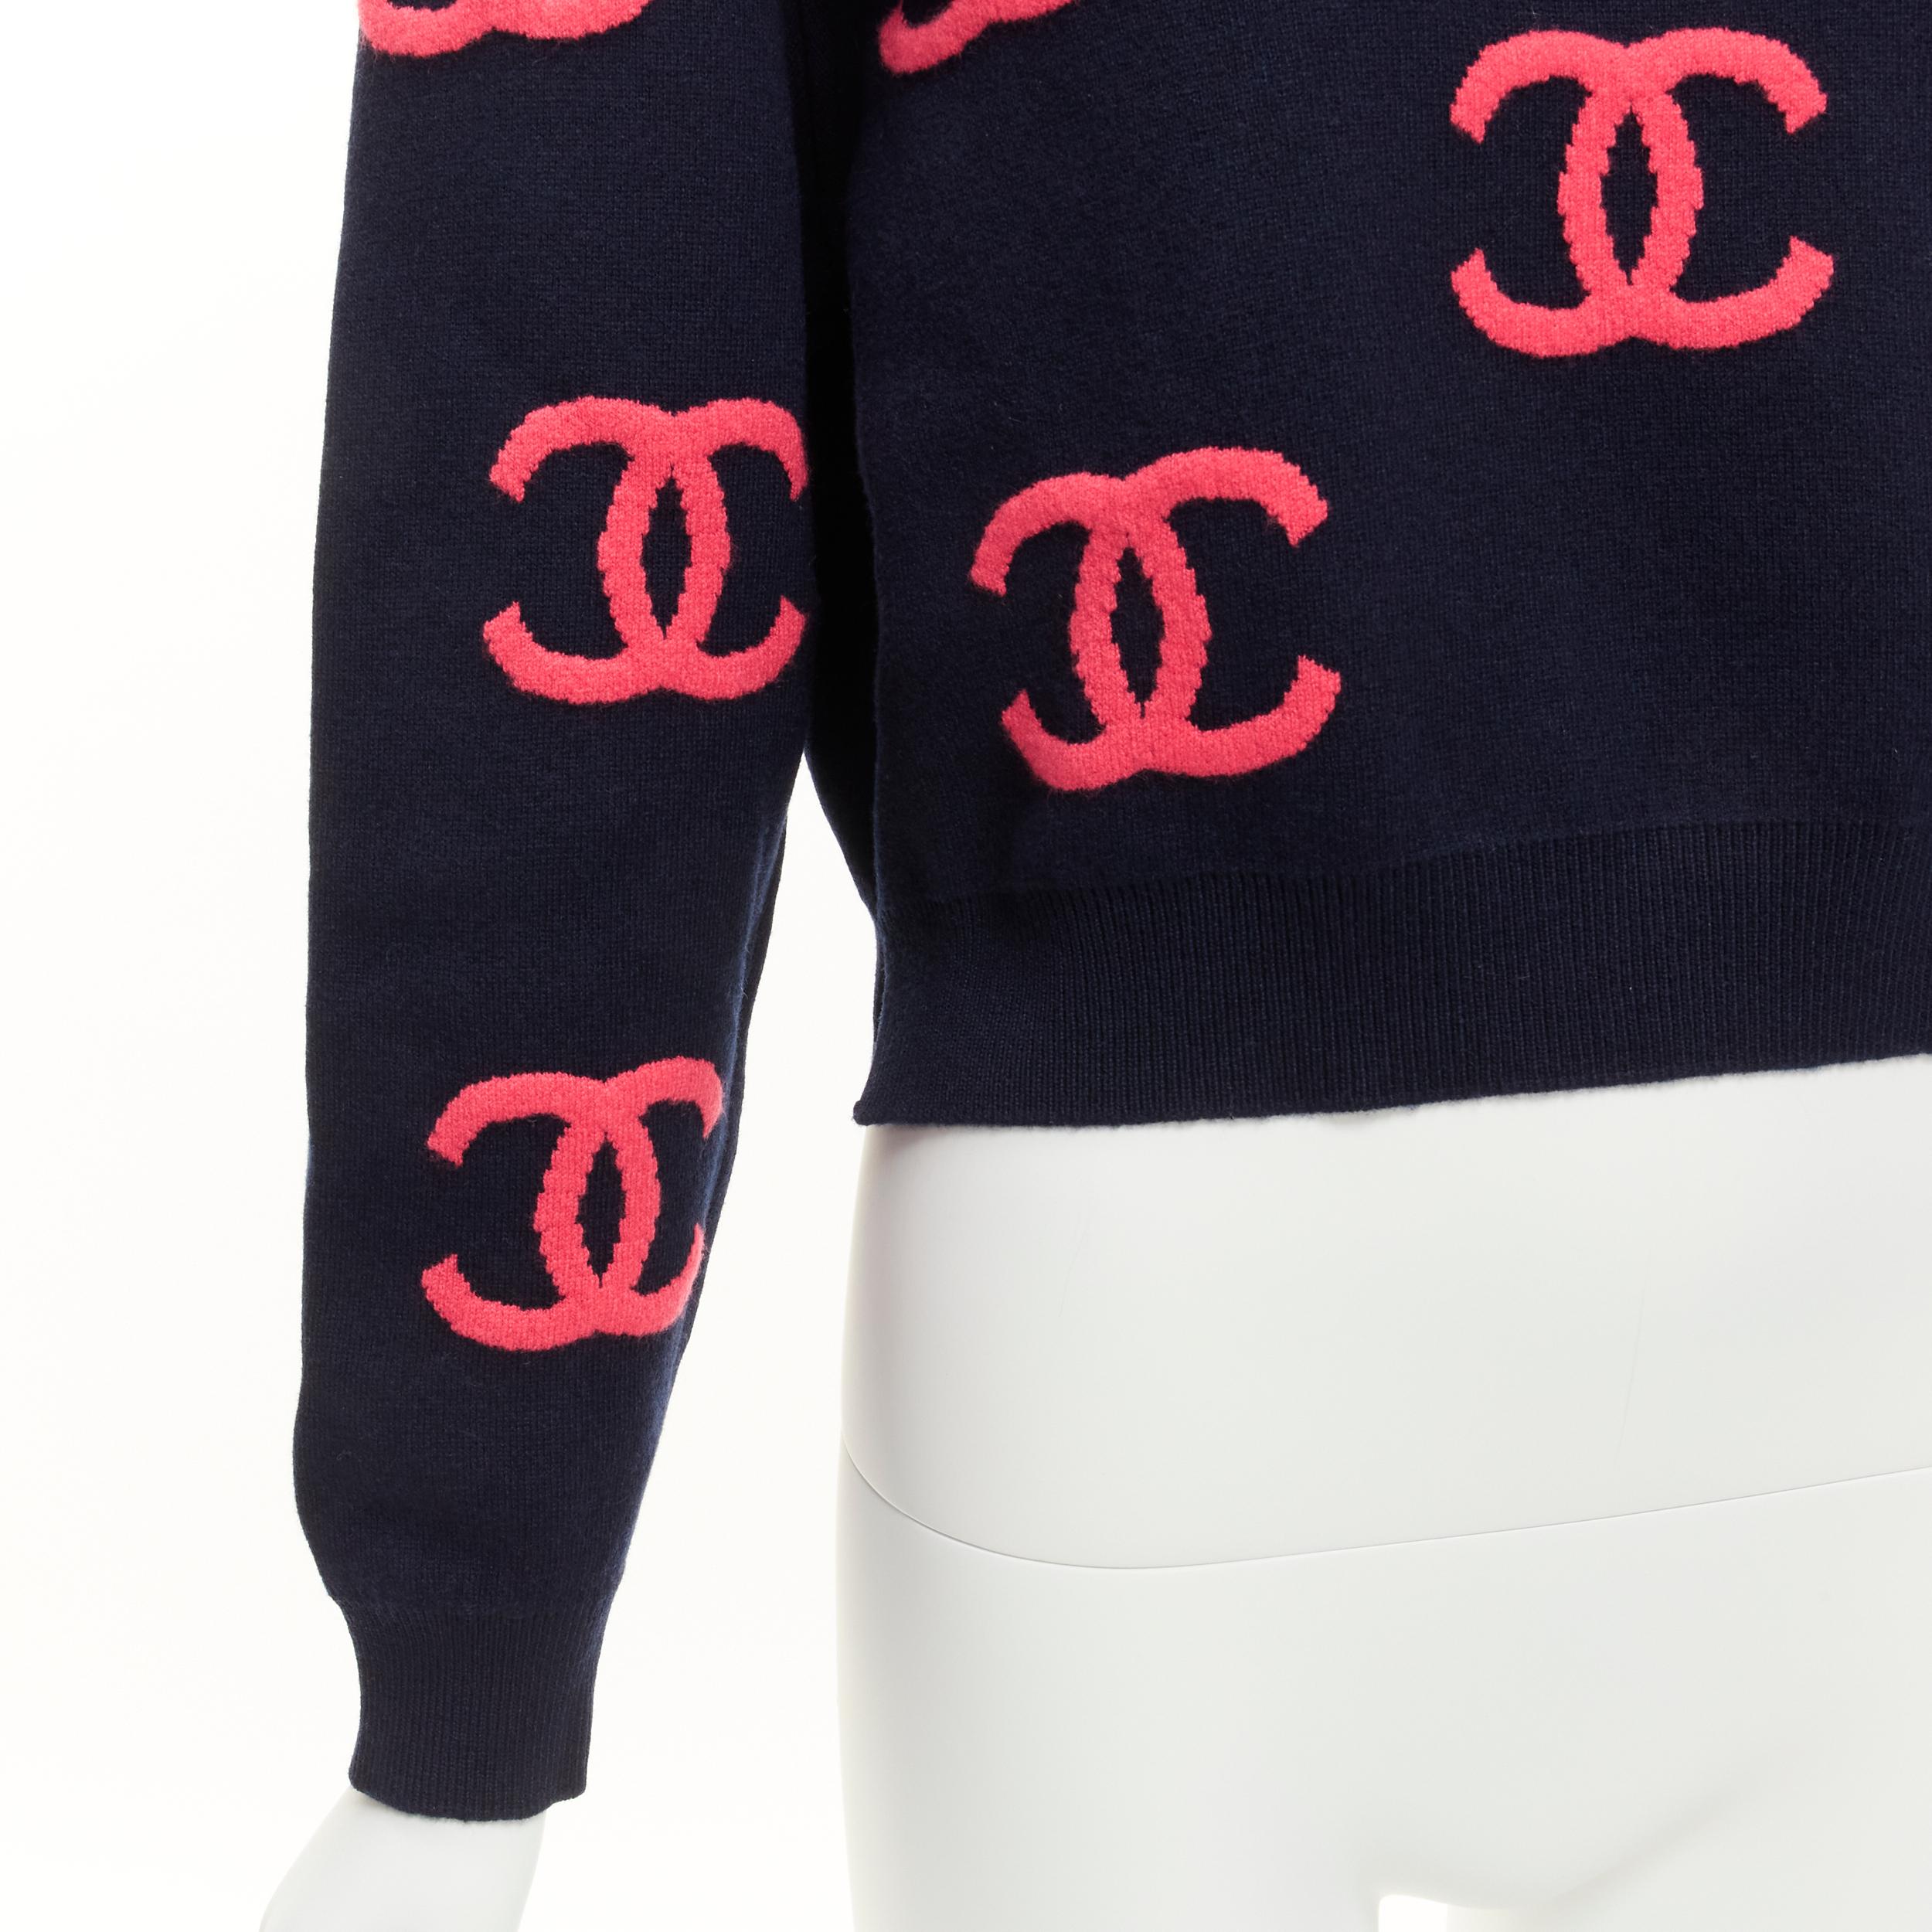 new CHANEL 21P pink navy CC logo intarsia cashmere blend cropped sweater FR38 M
Reference: TGAS/D00028
Brand: Chanel
Designer: Karl Lagerfeld
Collection: 21P
Material: Cashmere, Elastane
Color: Navy, Pink
Pattern: Logomania
Closure: Pullover
Made